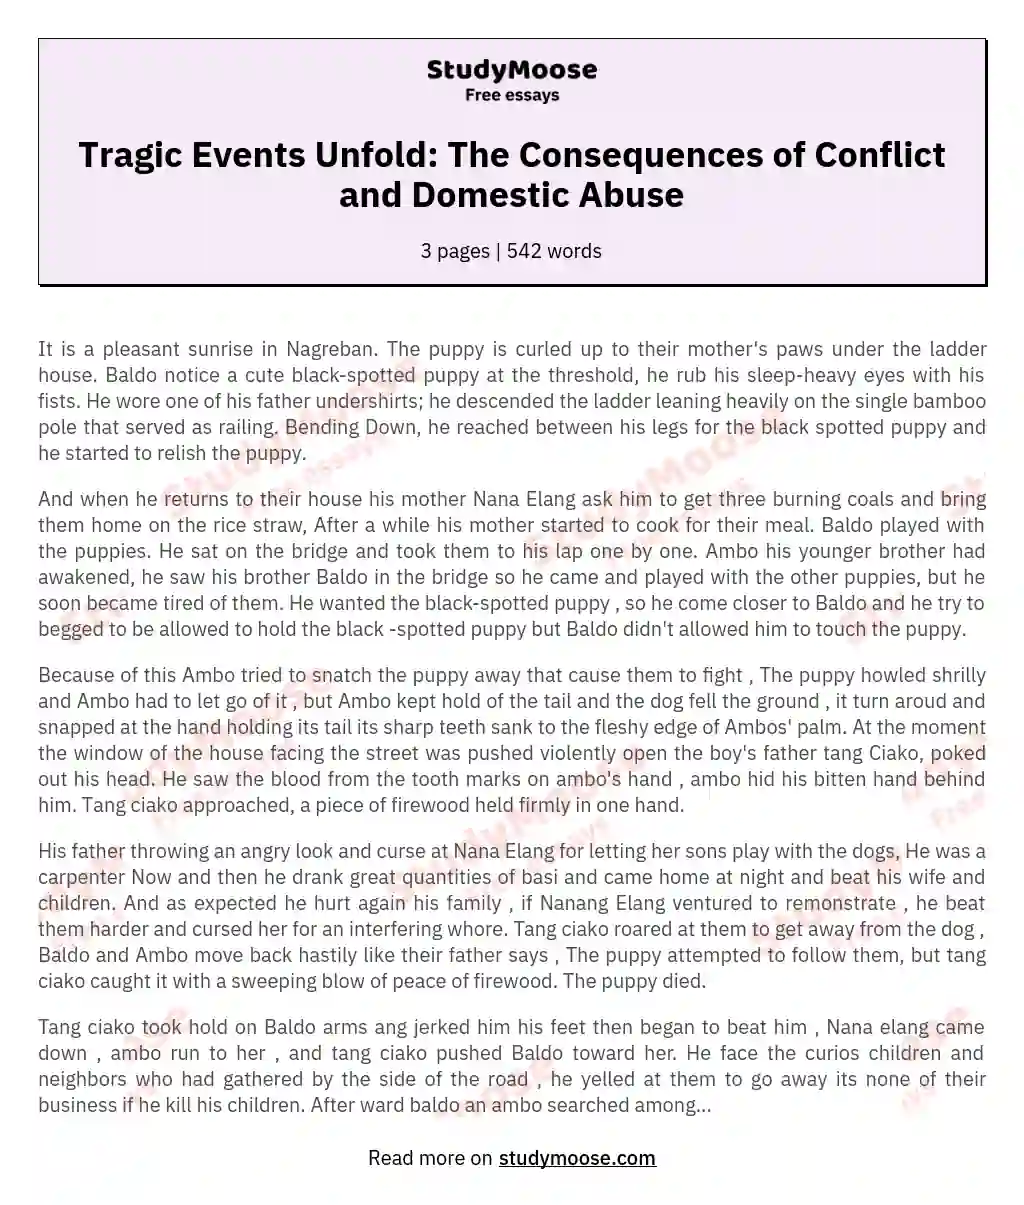 Tragic Events Unfold: The Consequences of Conflict and Domestic Abuse essay